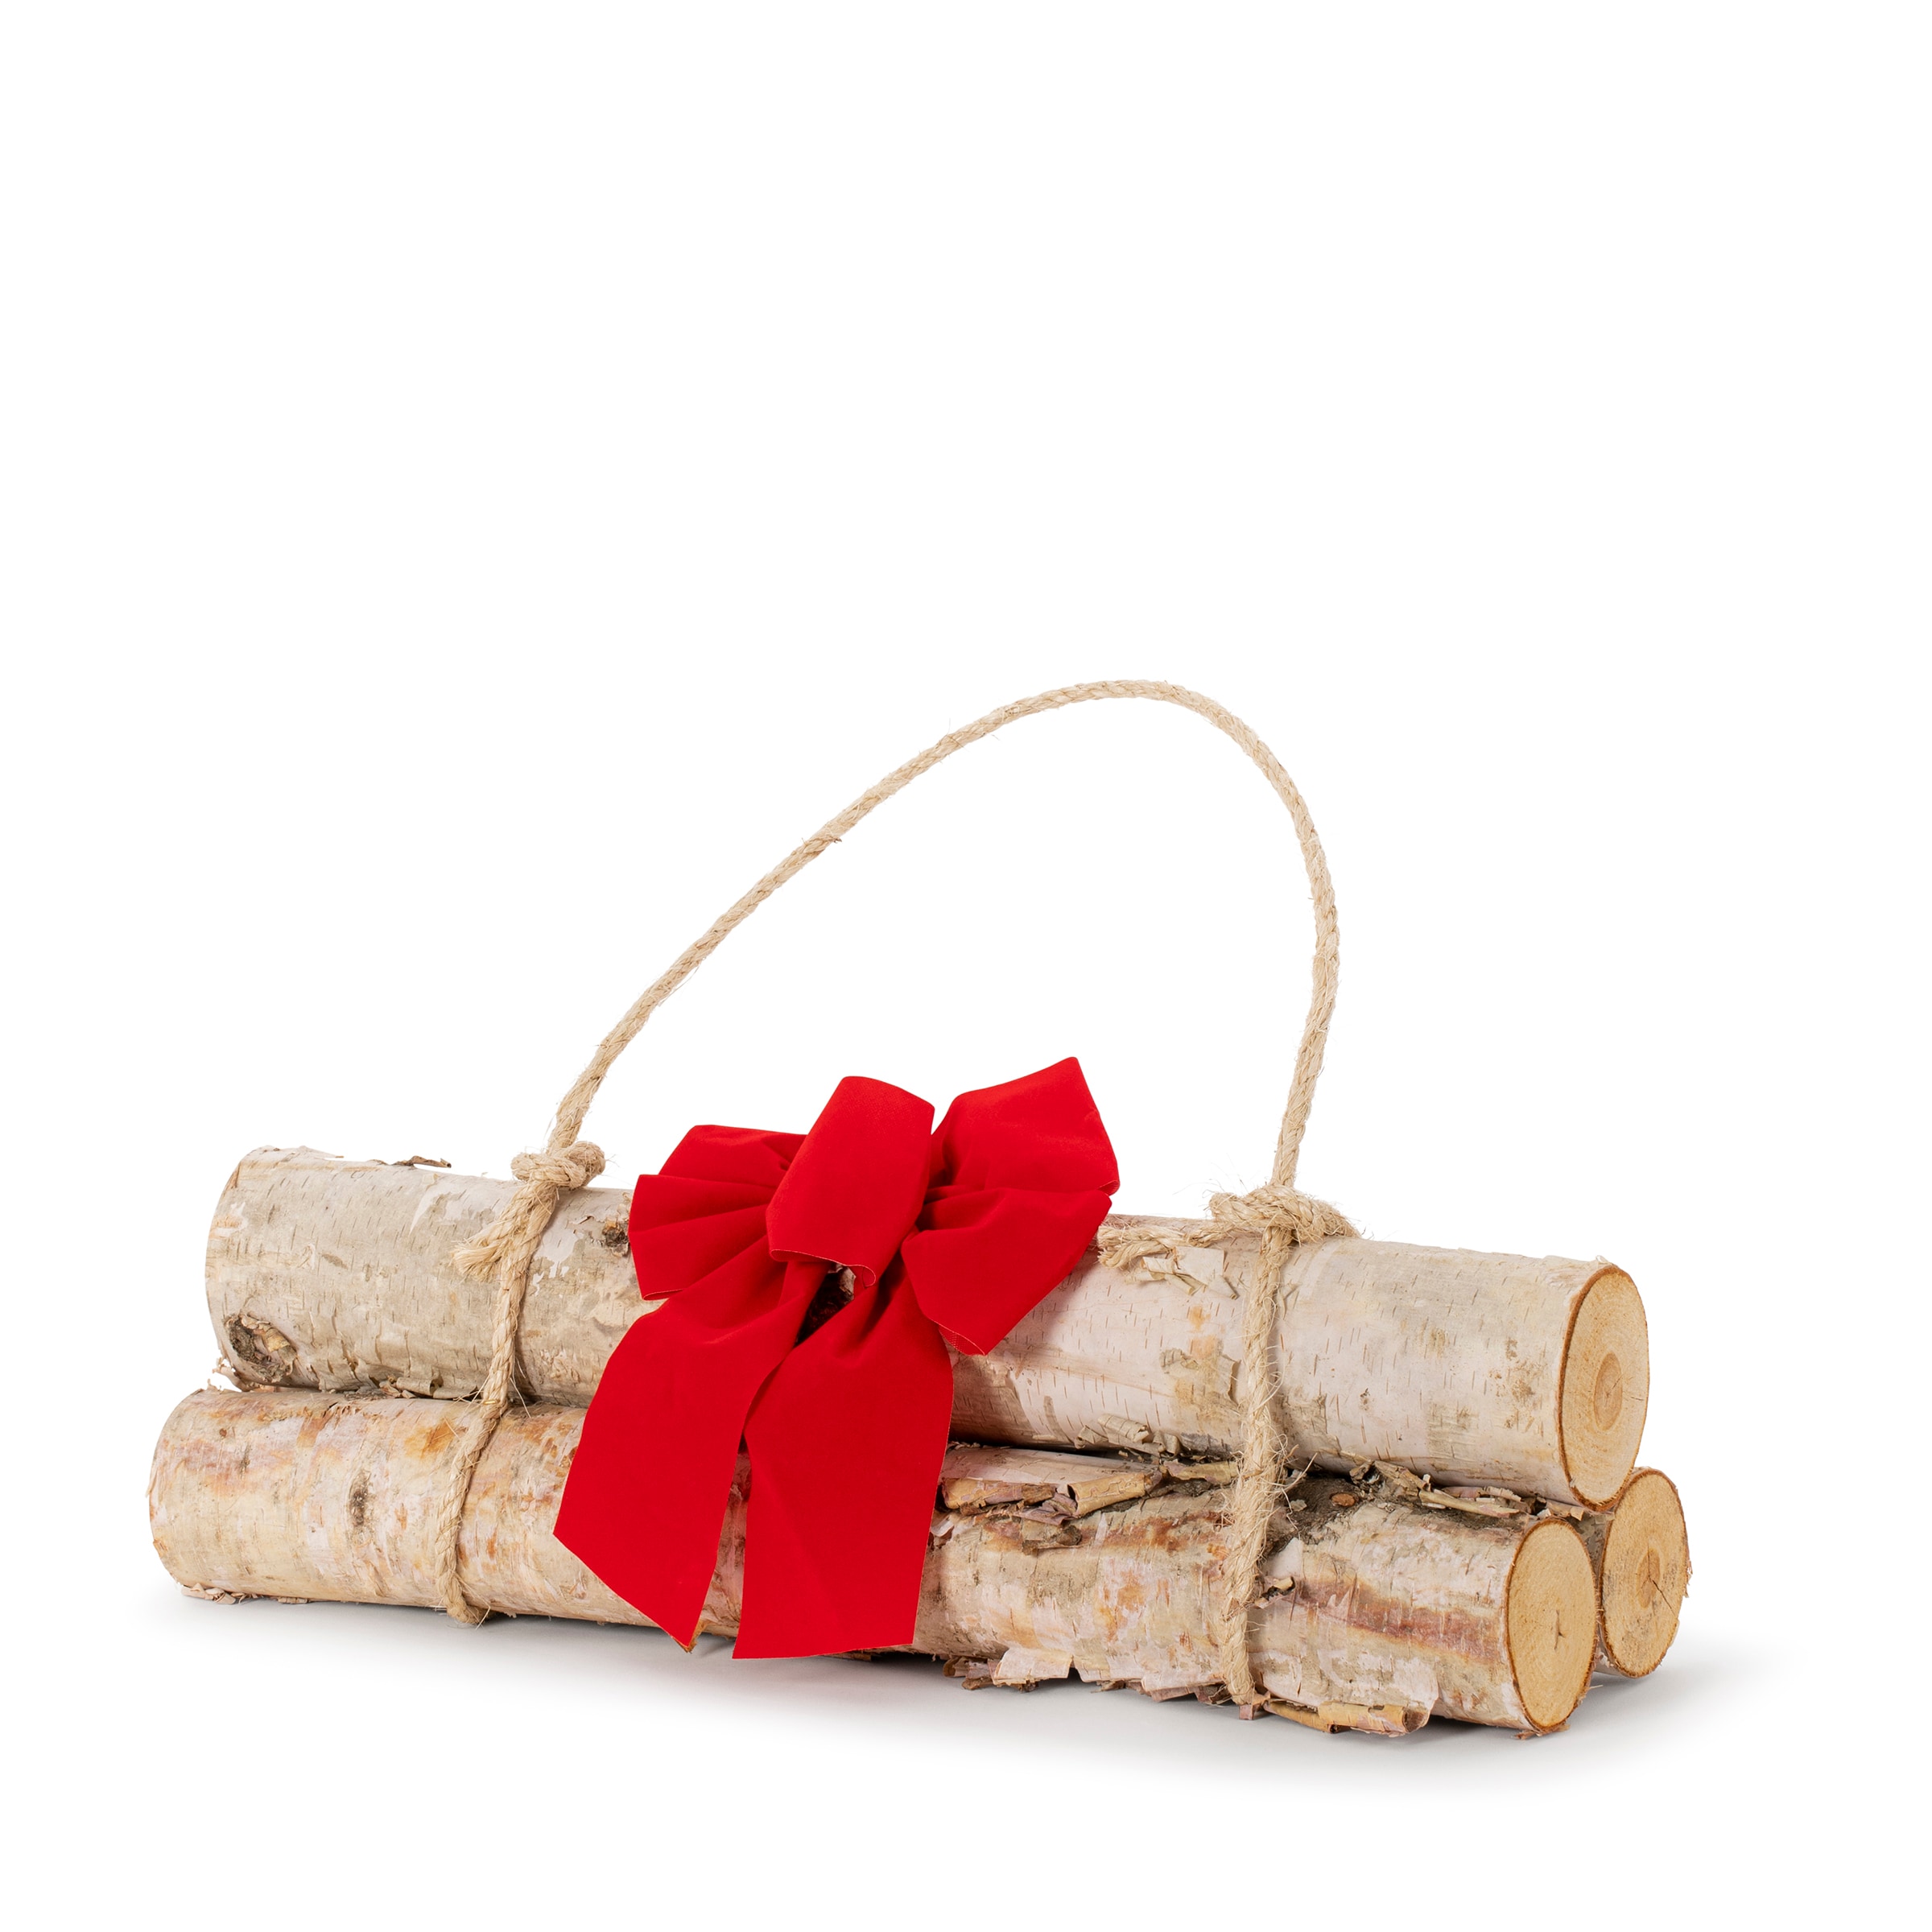 Birch bundle and greenery Holiday Decorations at